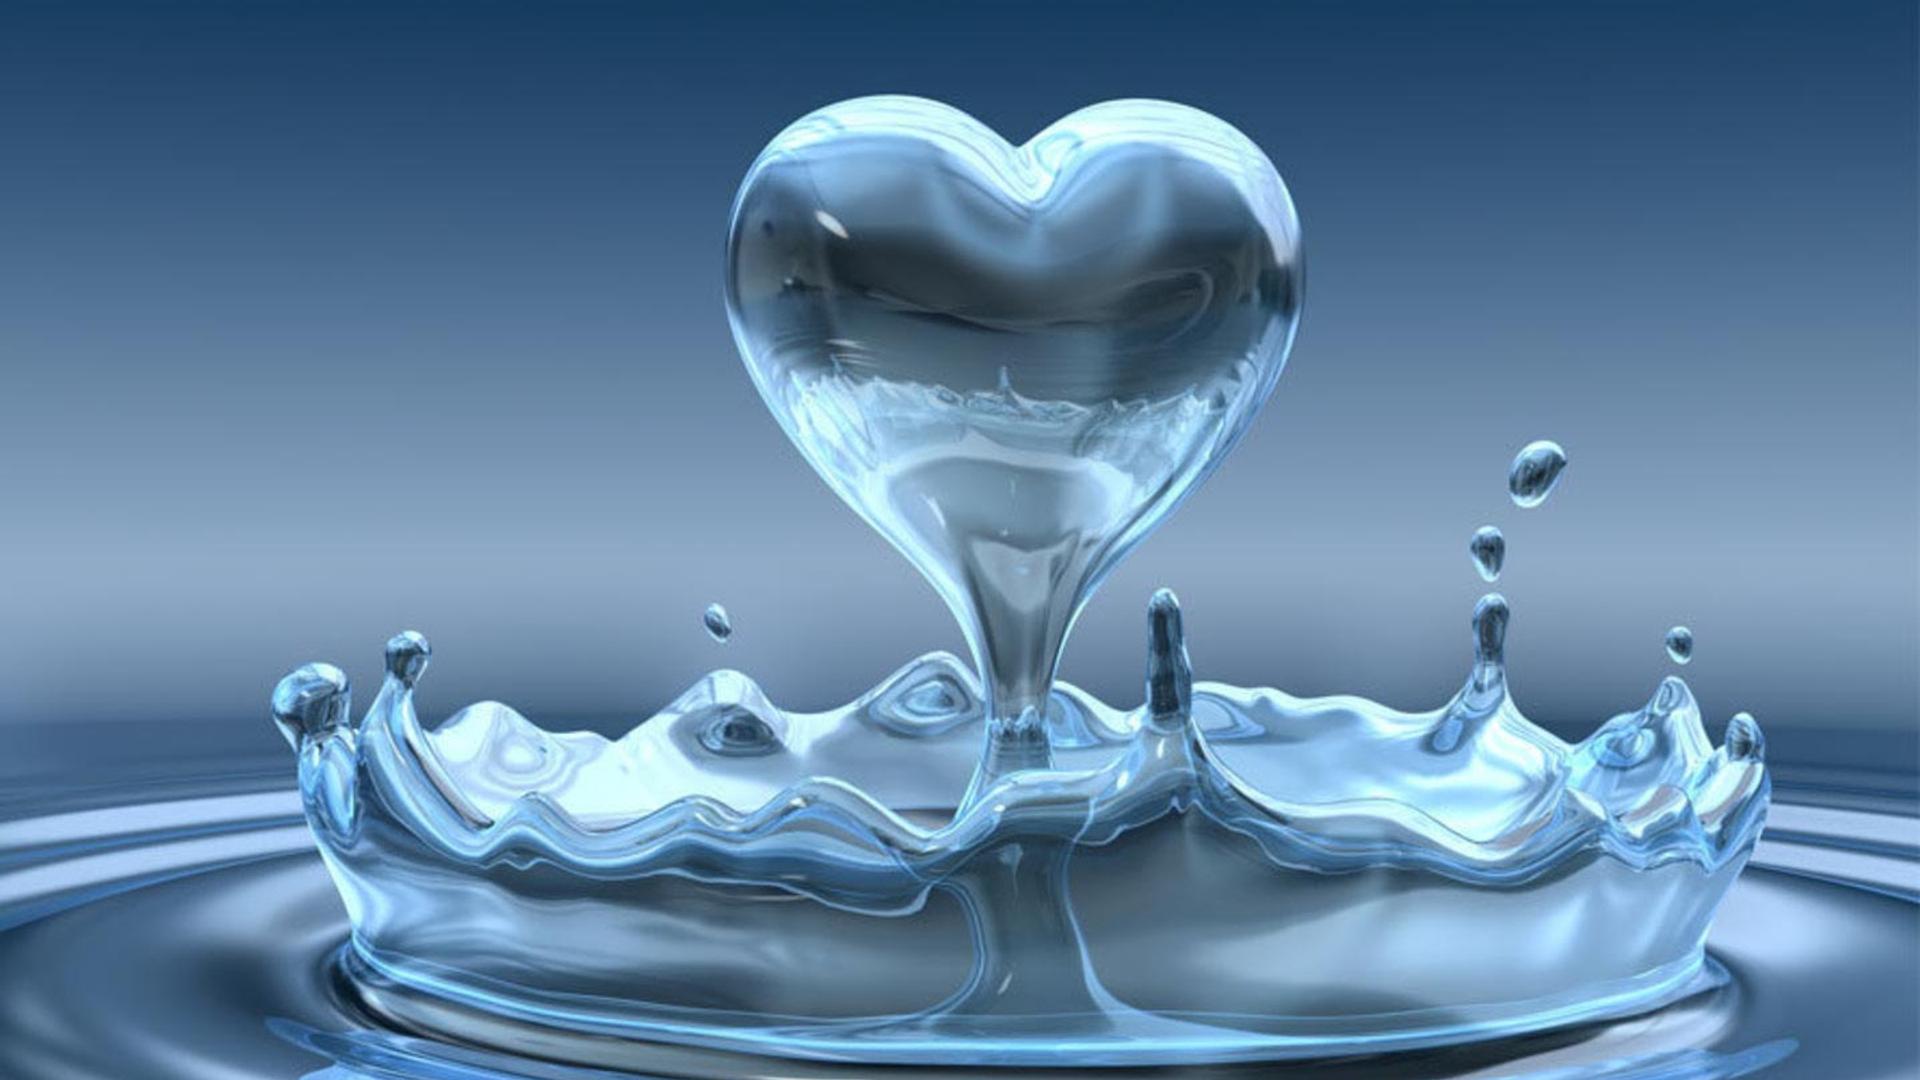 The water drop in the heart shape - Love wallpapers